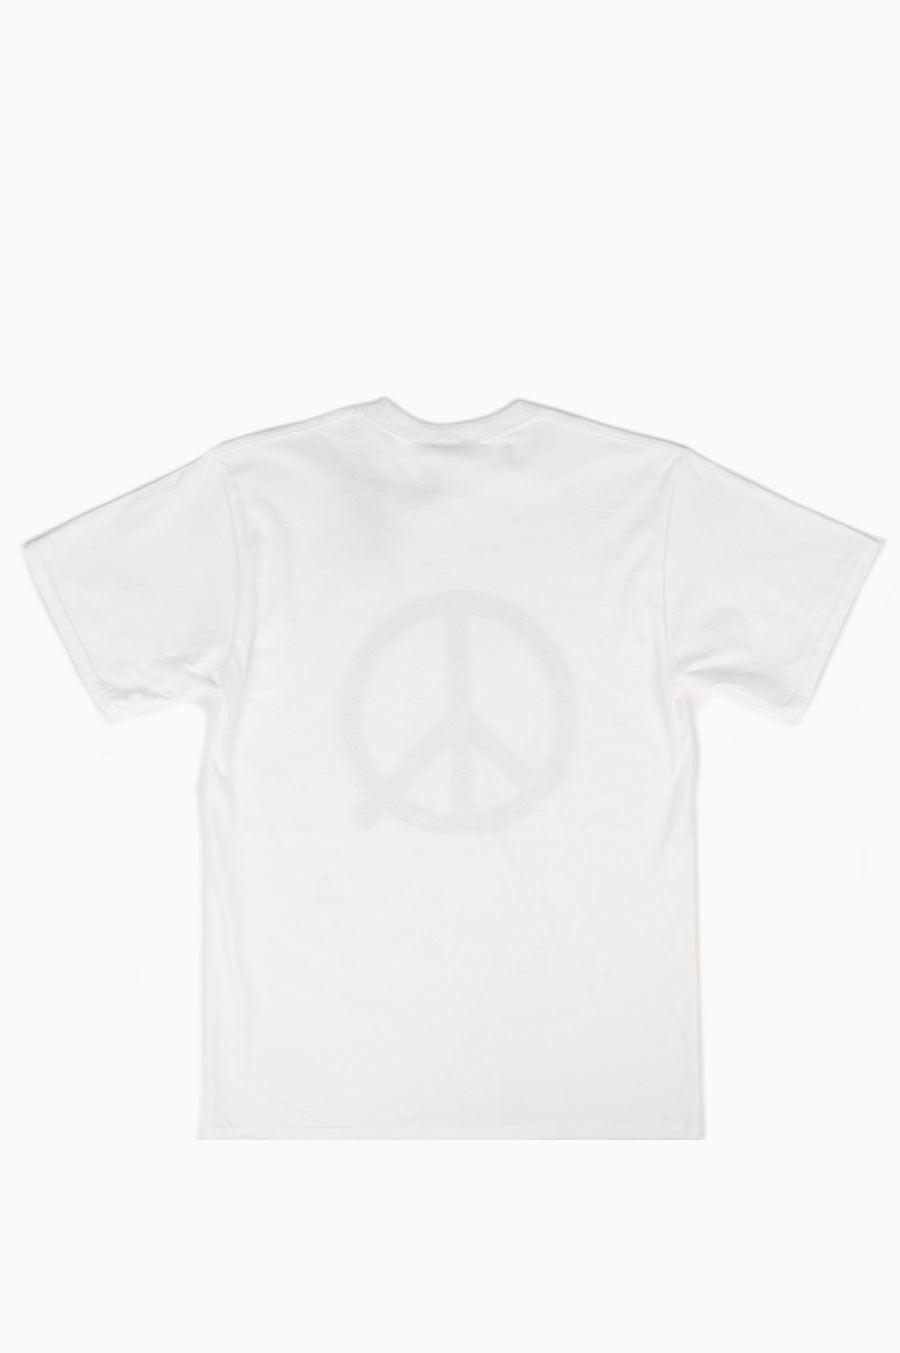 THE MUSEUM OF PEACE AND QUIET ICON T-SHIRT WHITE